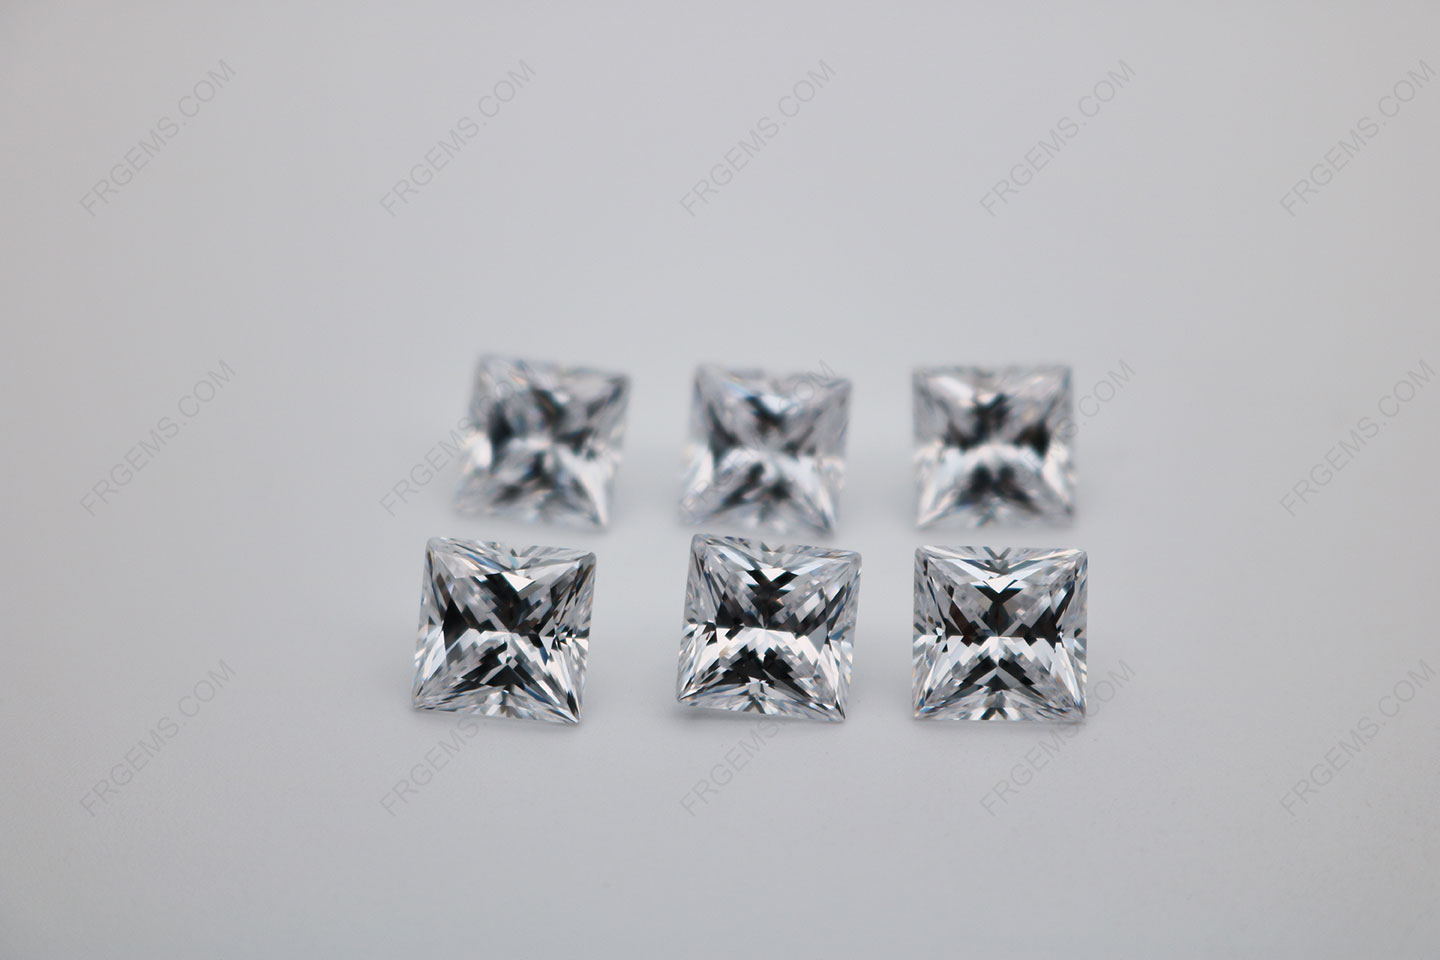 Cubic_Zirconia_White_Color_5A_Best_Quality_Square_Shape_faceted_Princess_Cut_8x8mm_stones_IMG_0665